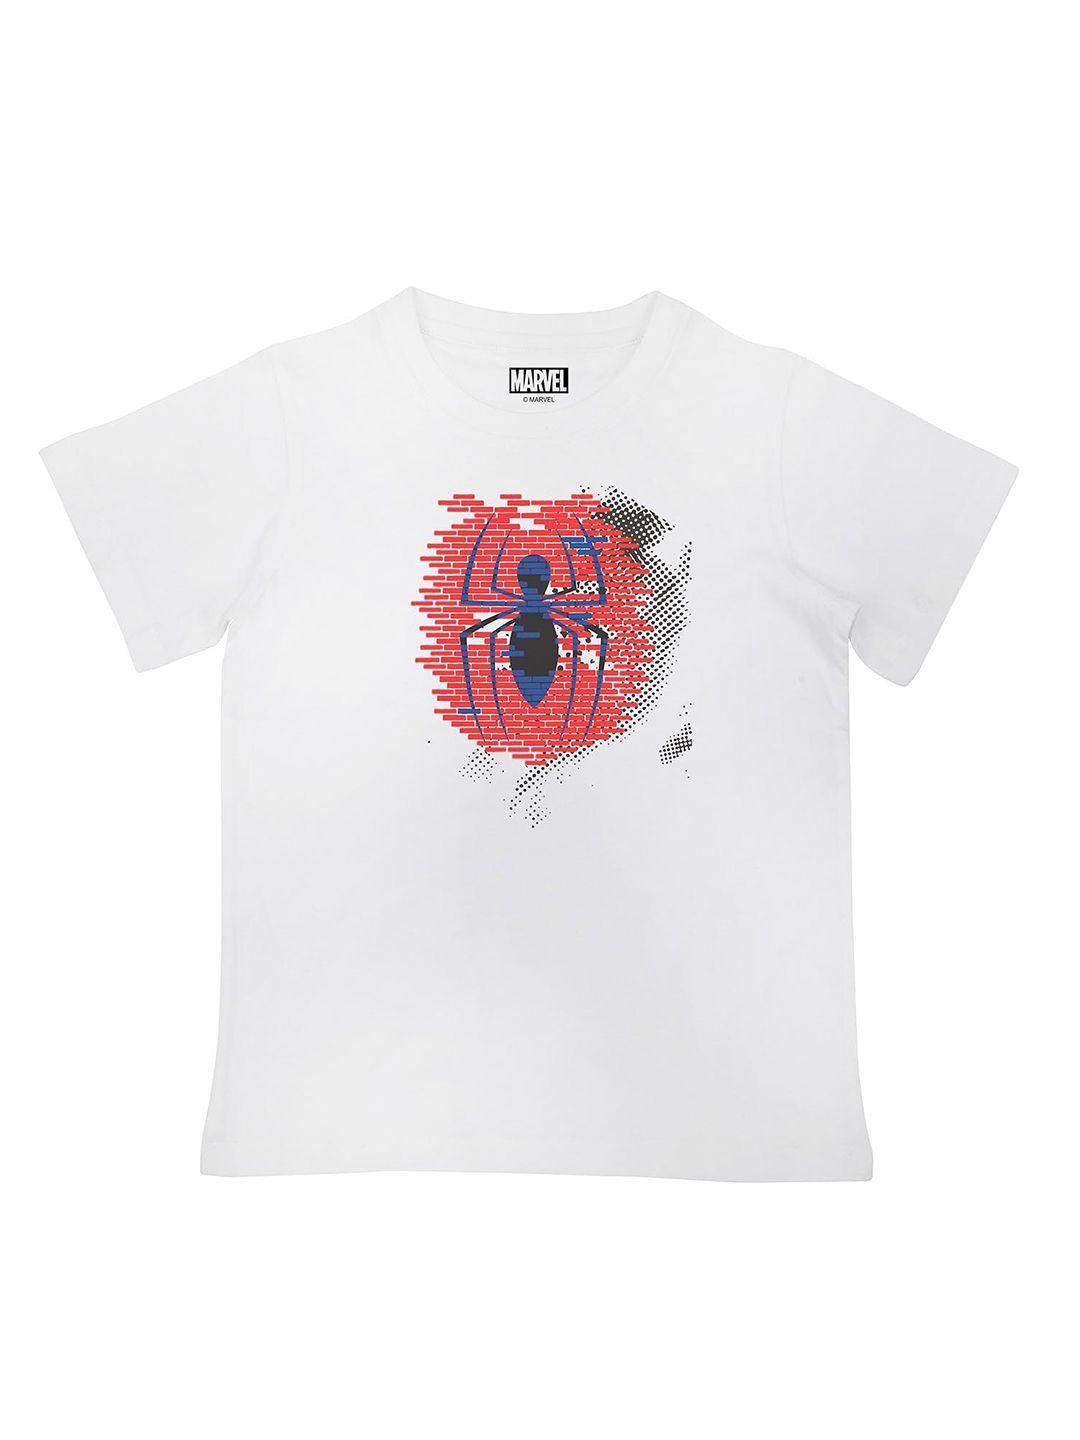 marvel by wear your mind boys white printed t-shirt